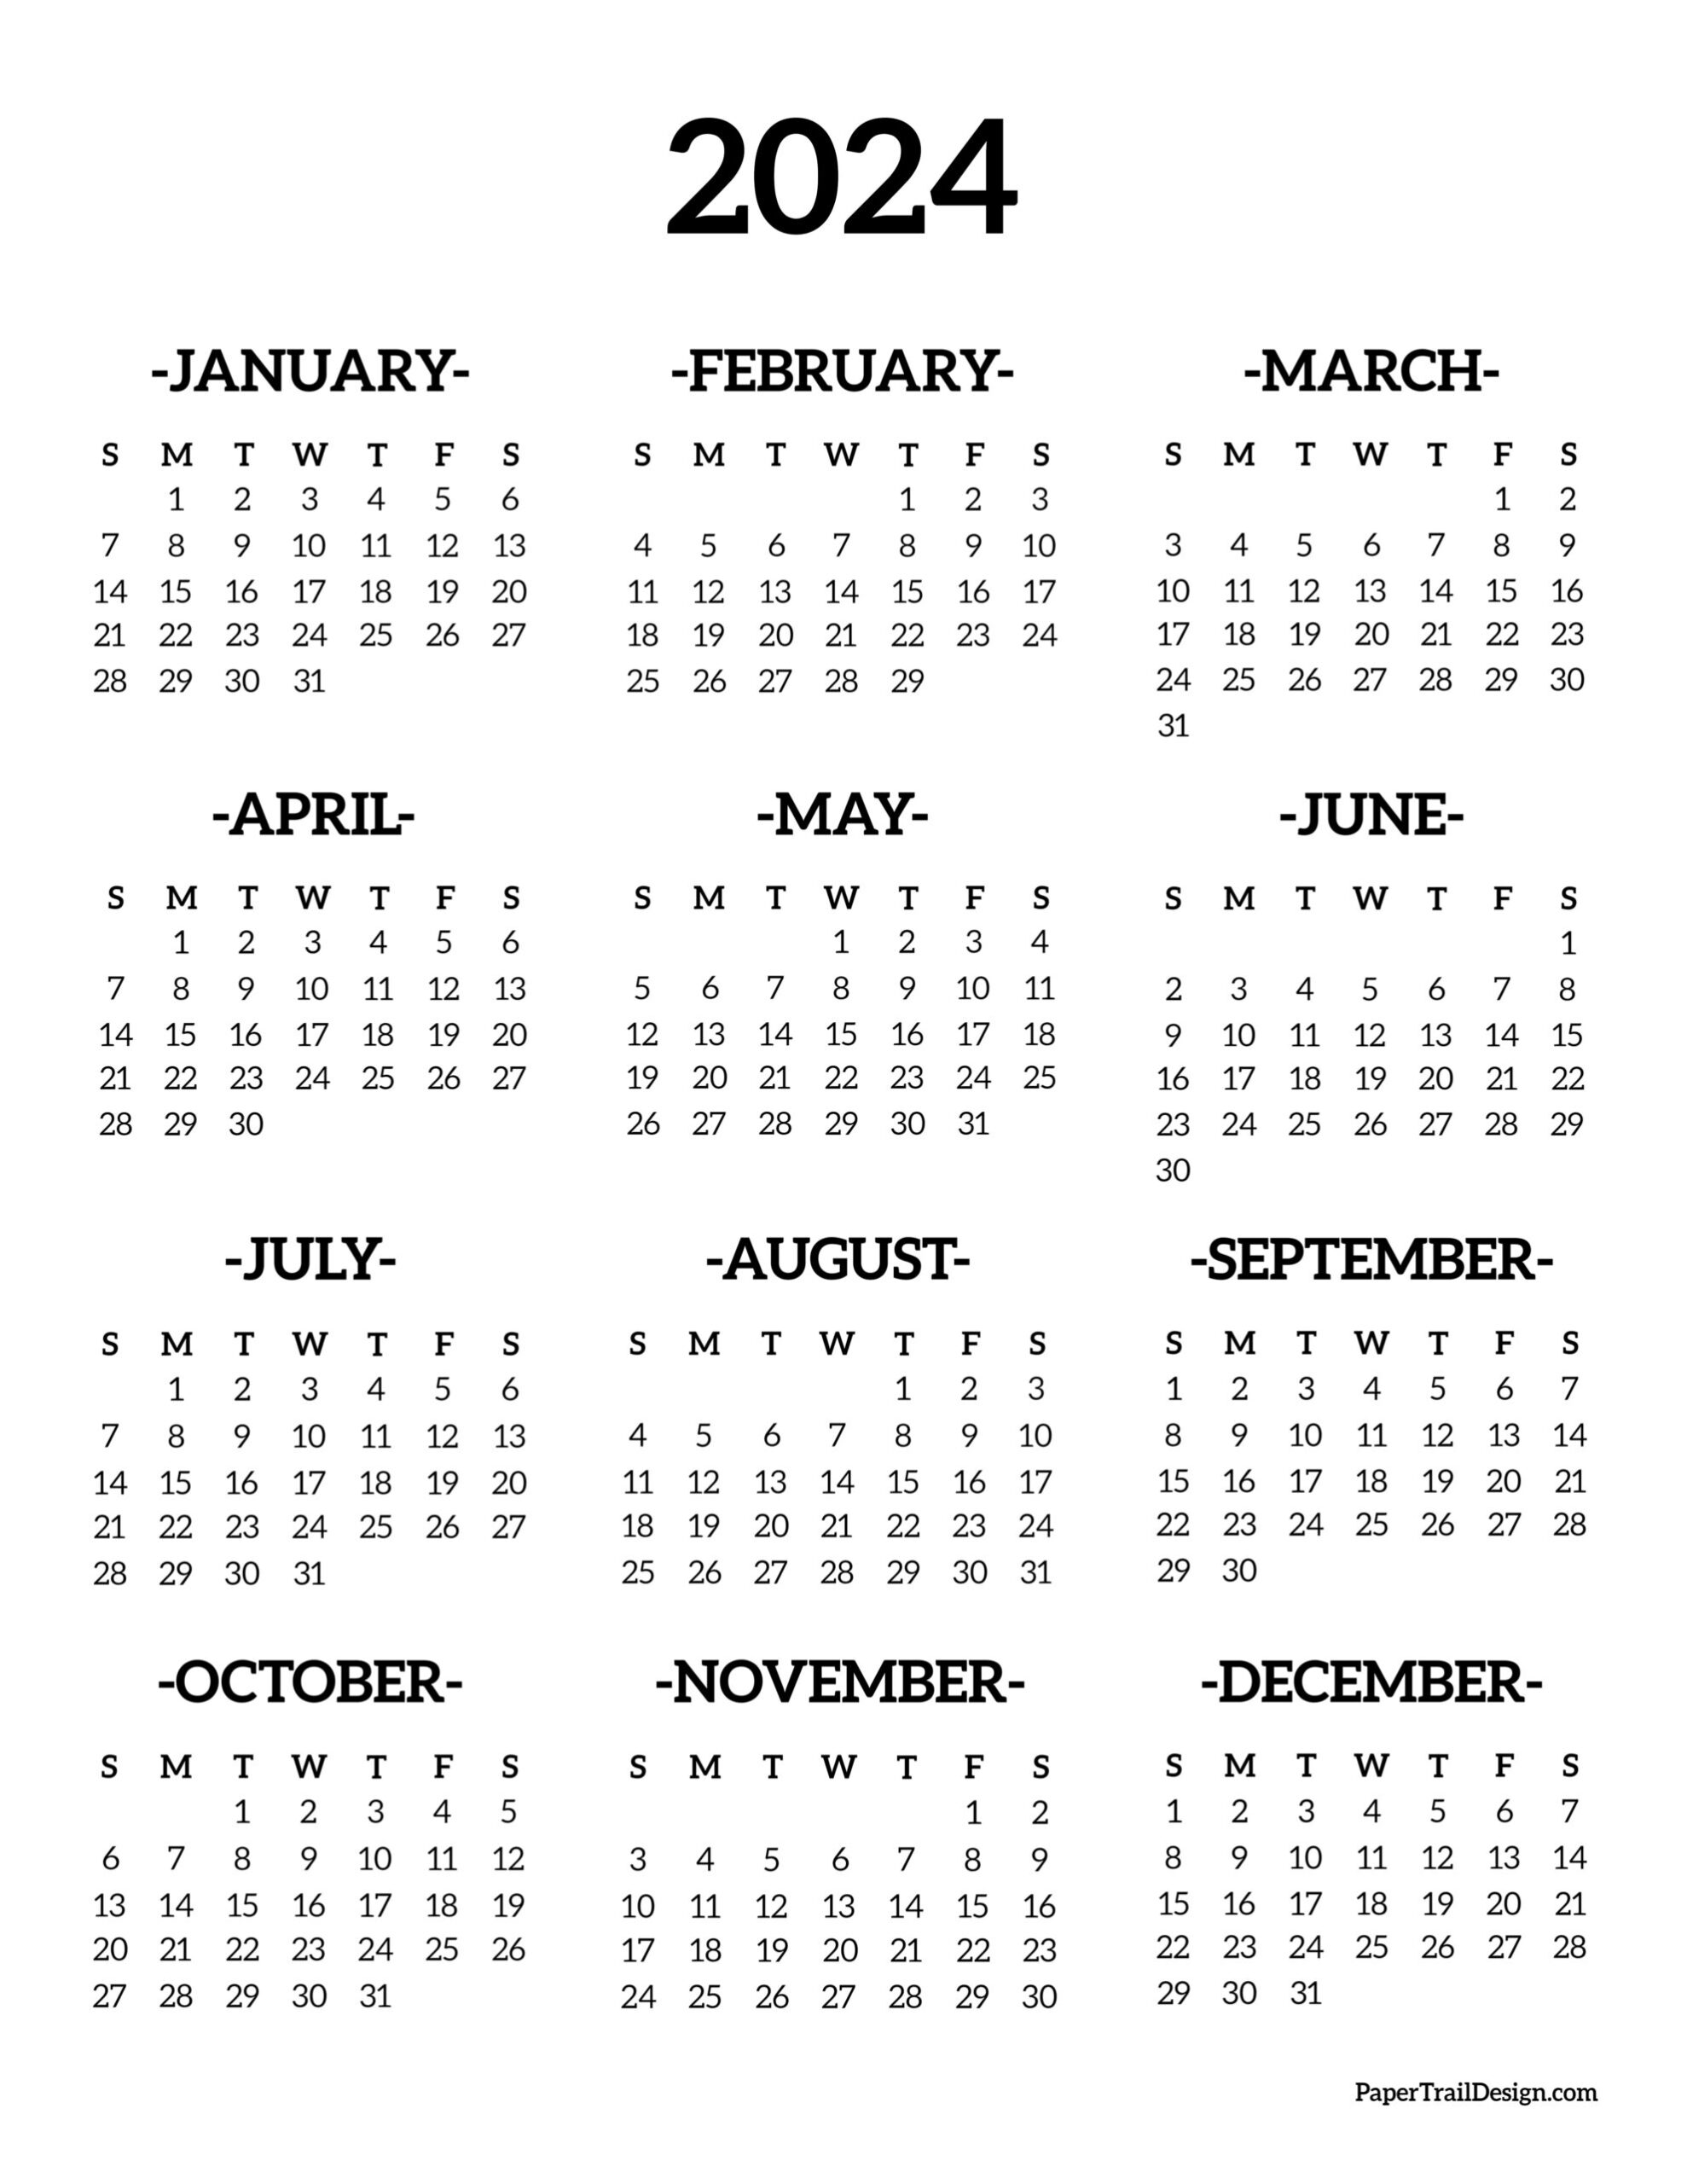 Calendar 2024 Printable One Page - Paper Trail Design for Free Printable 2024 Yearly Calendar